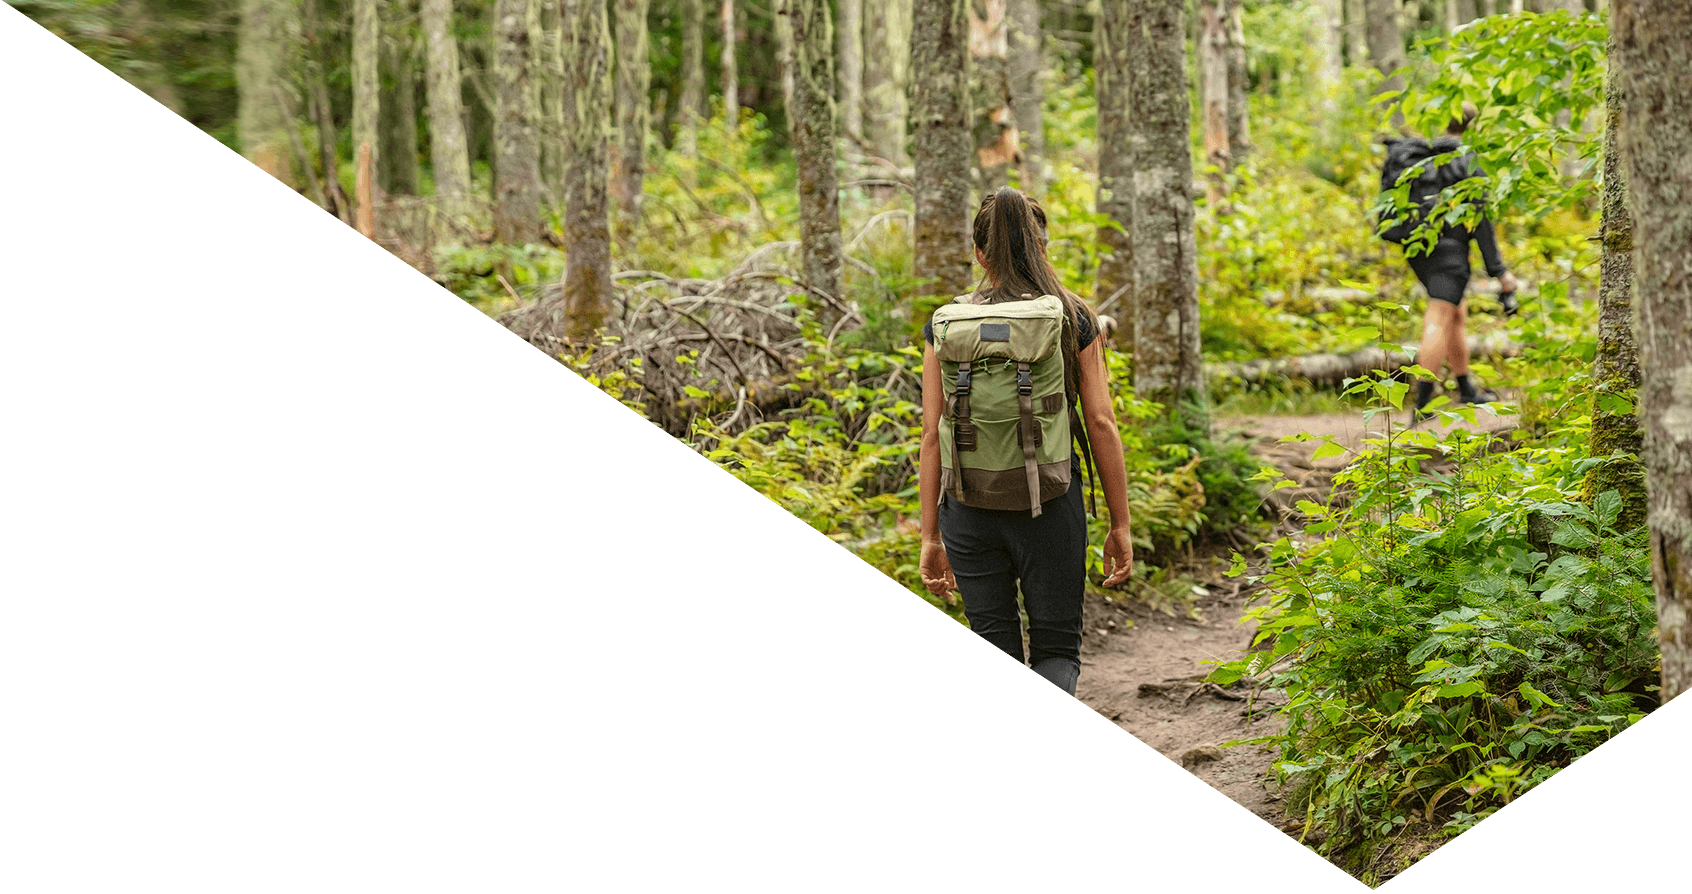 Image showing a woman hiking